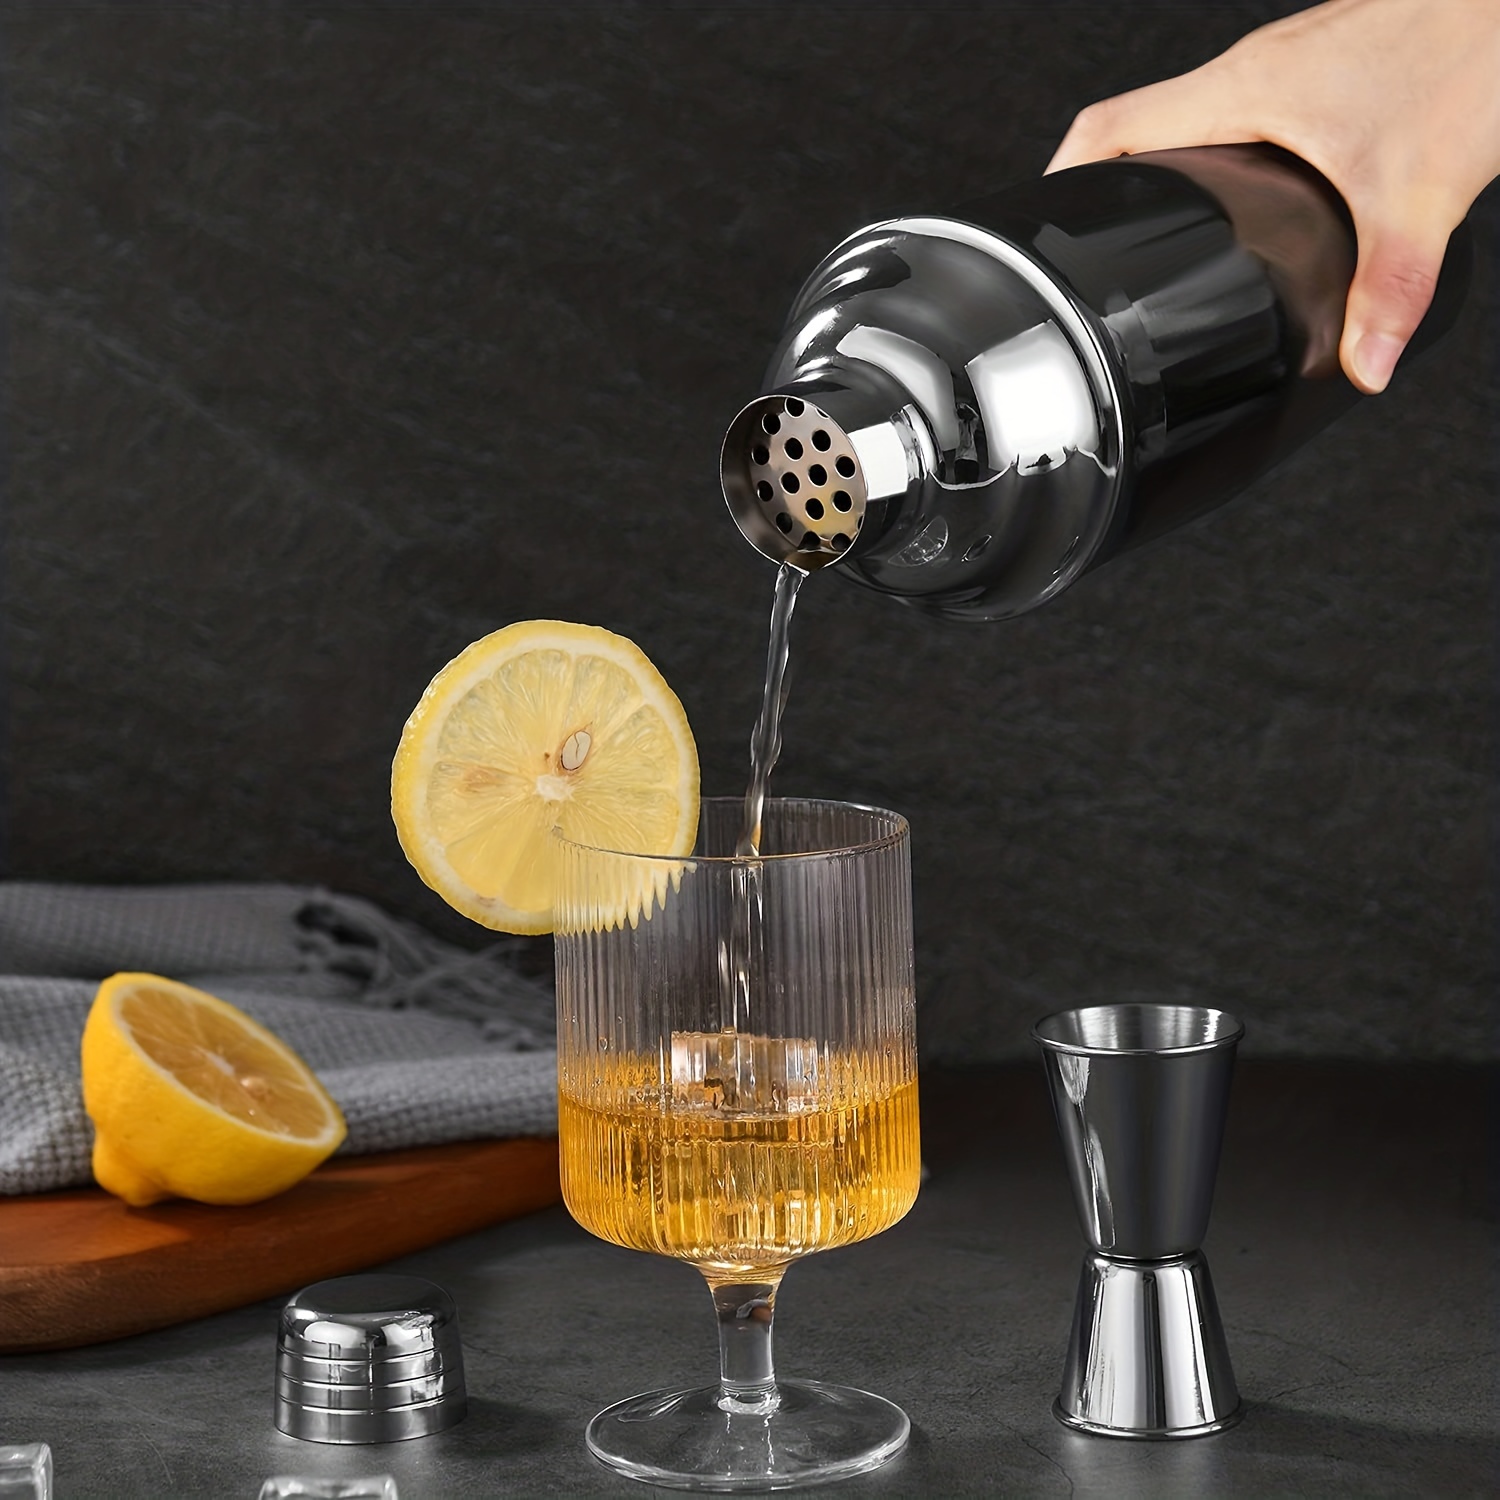  Nitial 6 Pcs 25 oz Stainless Steel Cocktail Shaker No Leaks Martini  Shaker with Built In Strainer Bar Shaker Bartender Shaker Mixed Drink Shaker  Margarita Mixer Tools for Mixed Drinks, Beginners